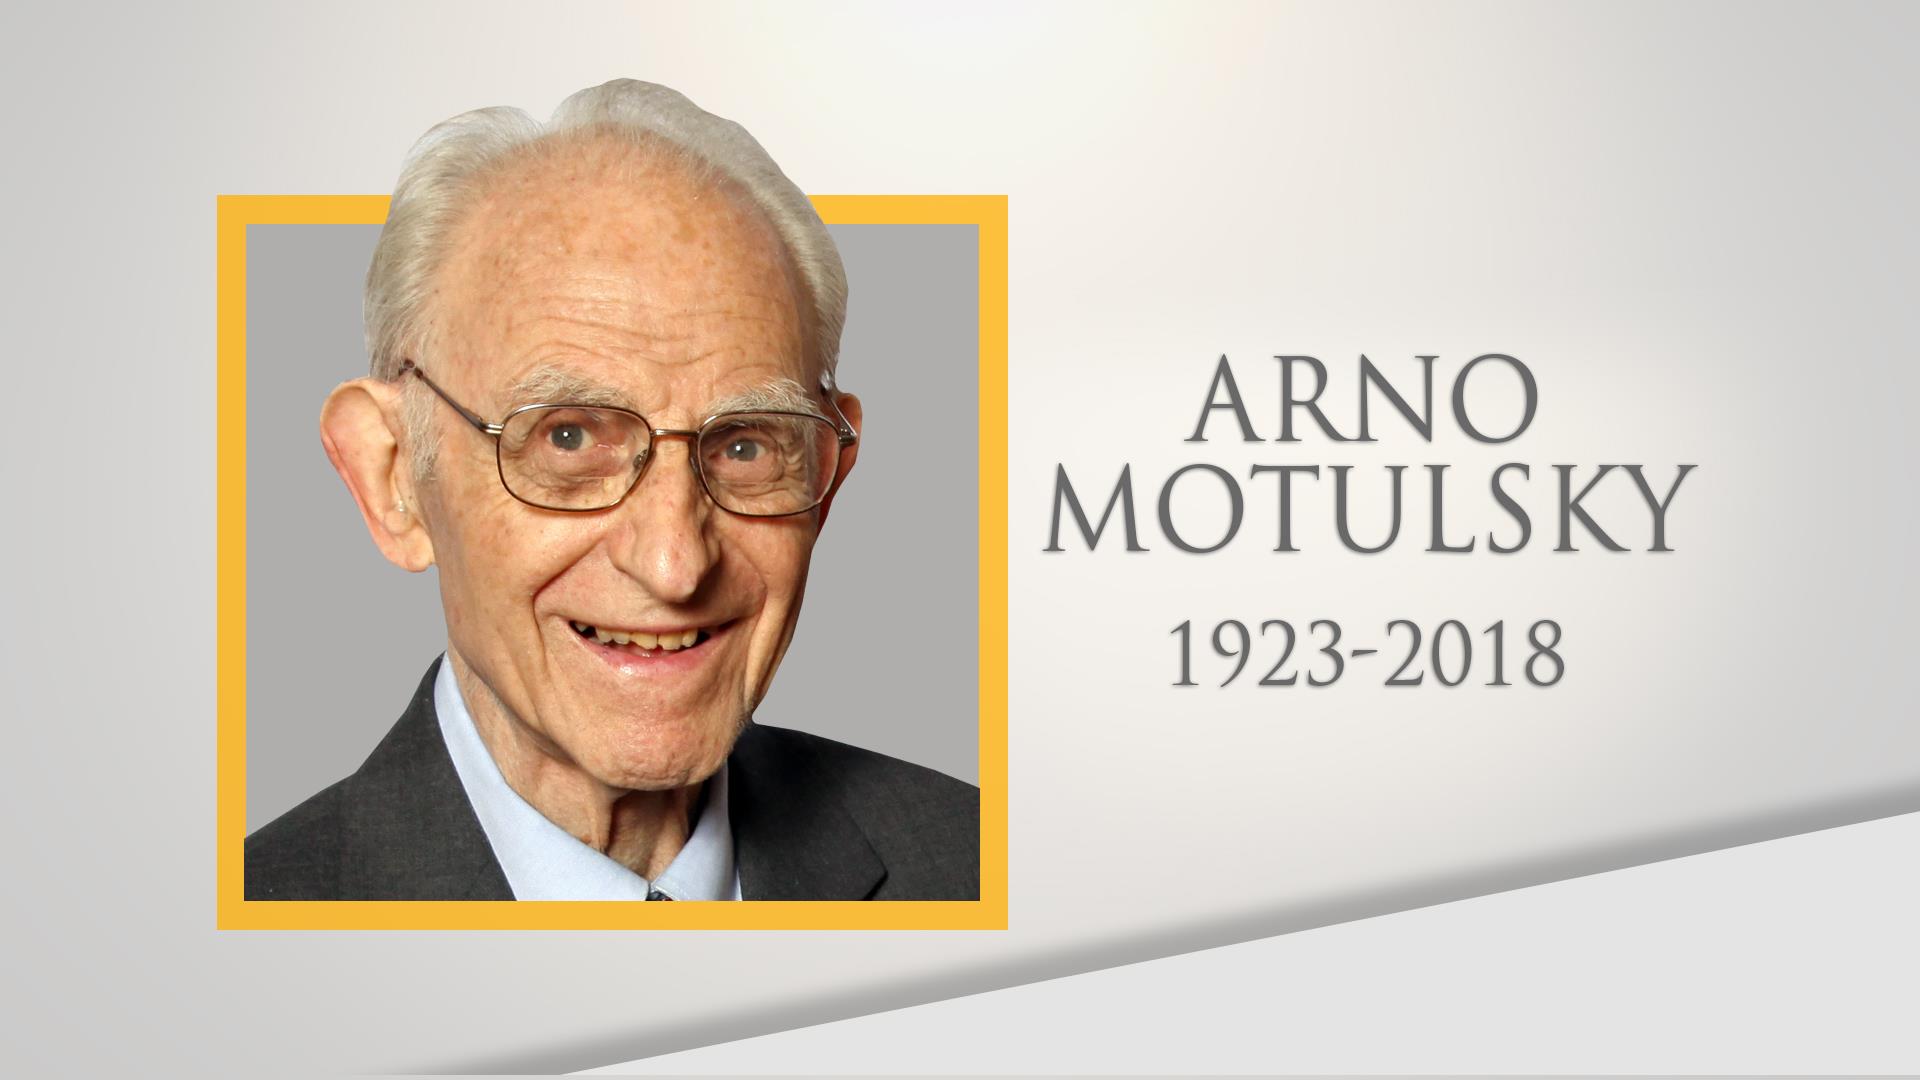 Life well lived: Medical genetics founder Dr. Arno Motulsky dies at 94